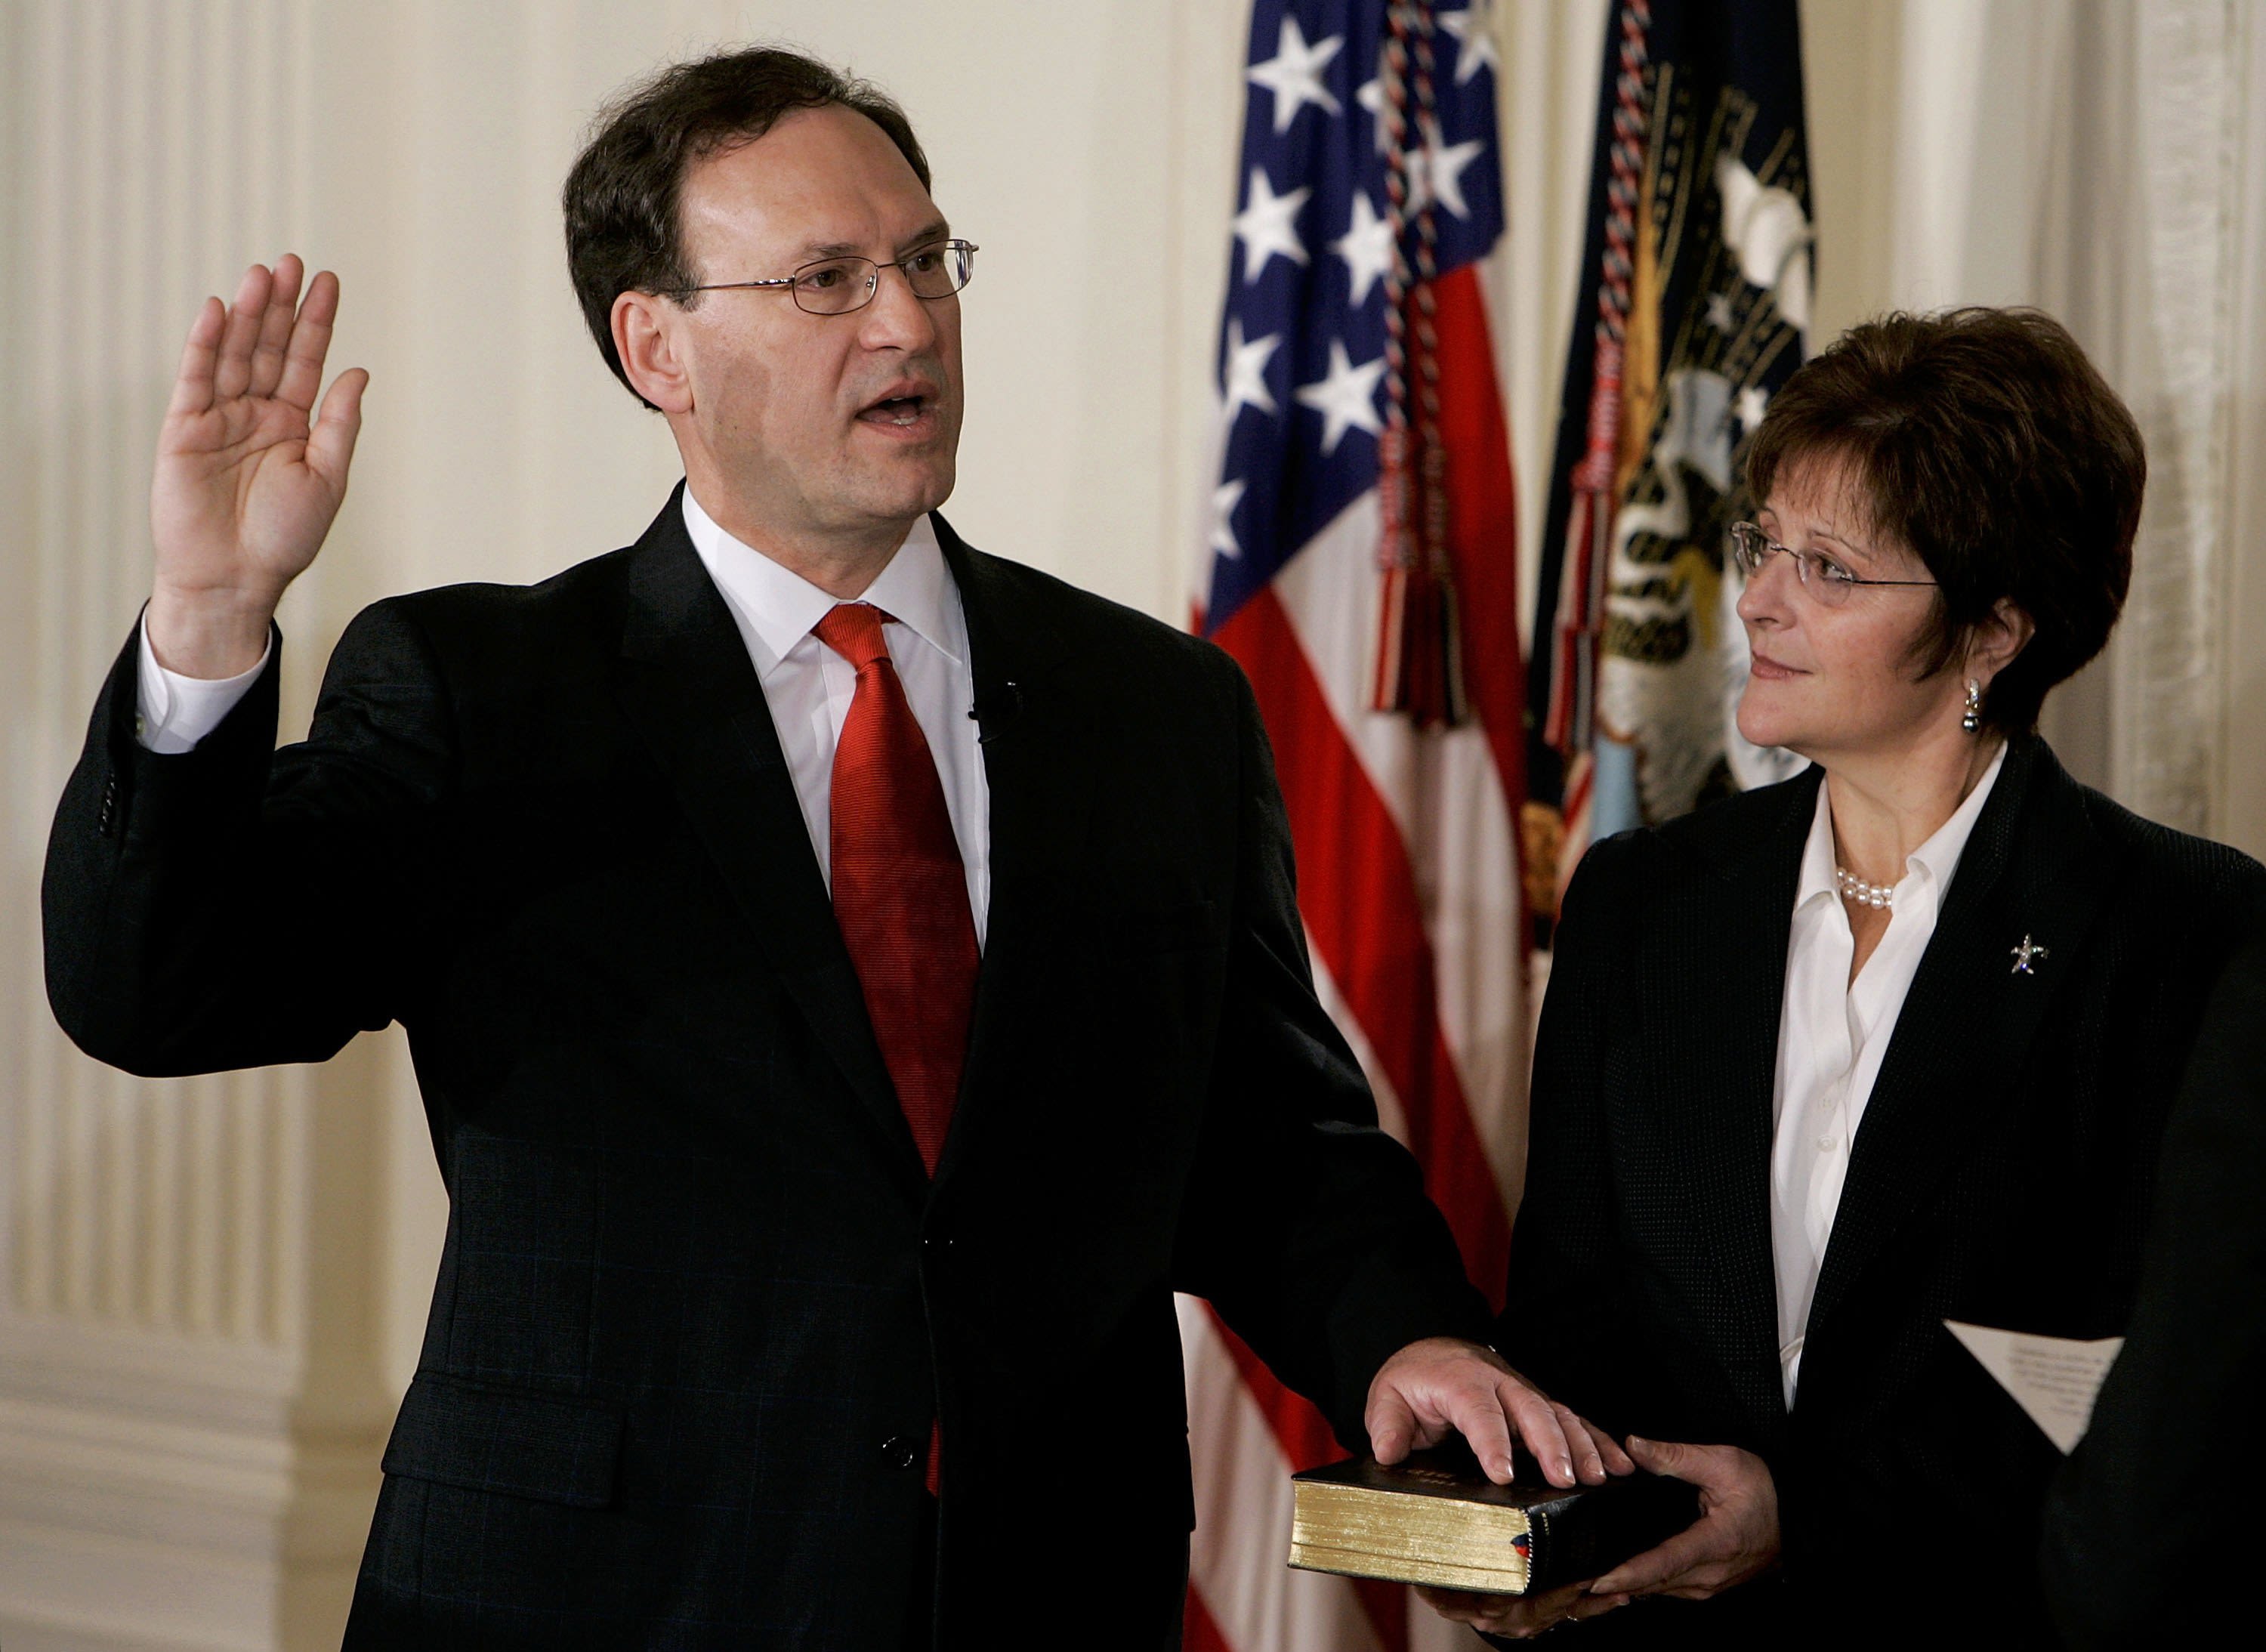 Justice Samuel Alito's wife's explanation for upside-down flag